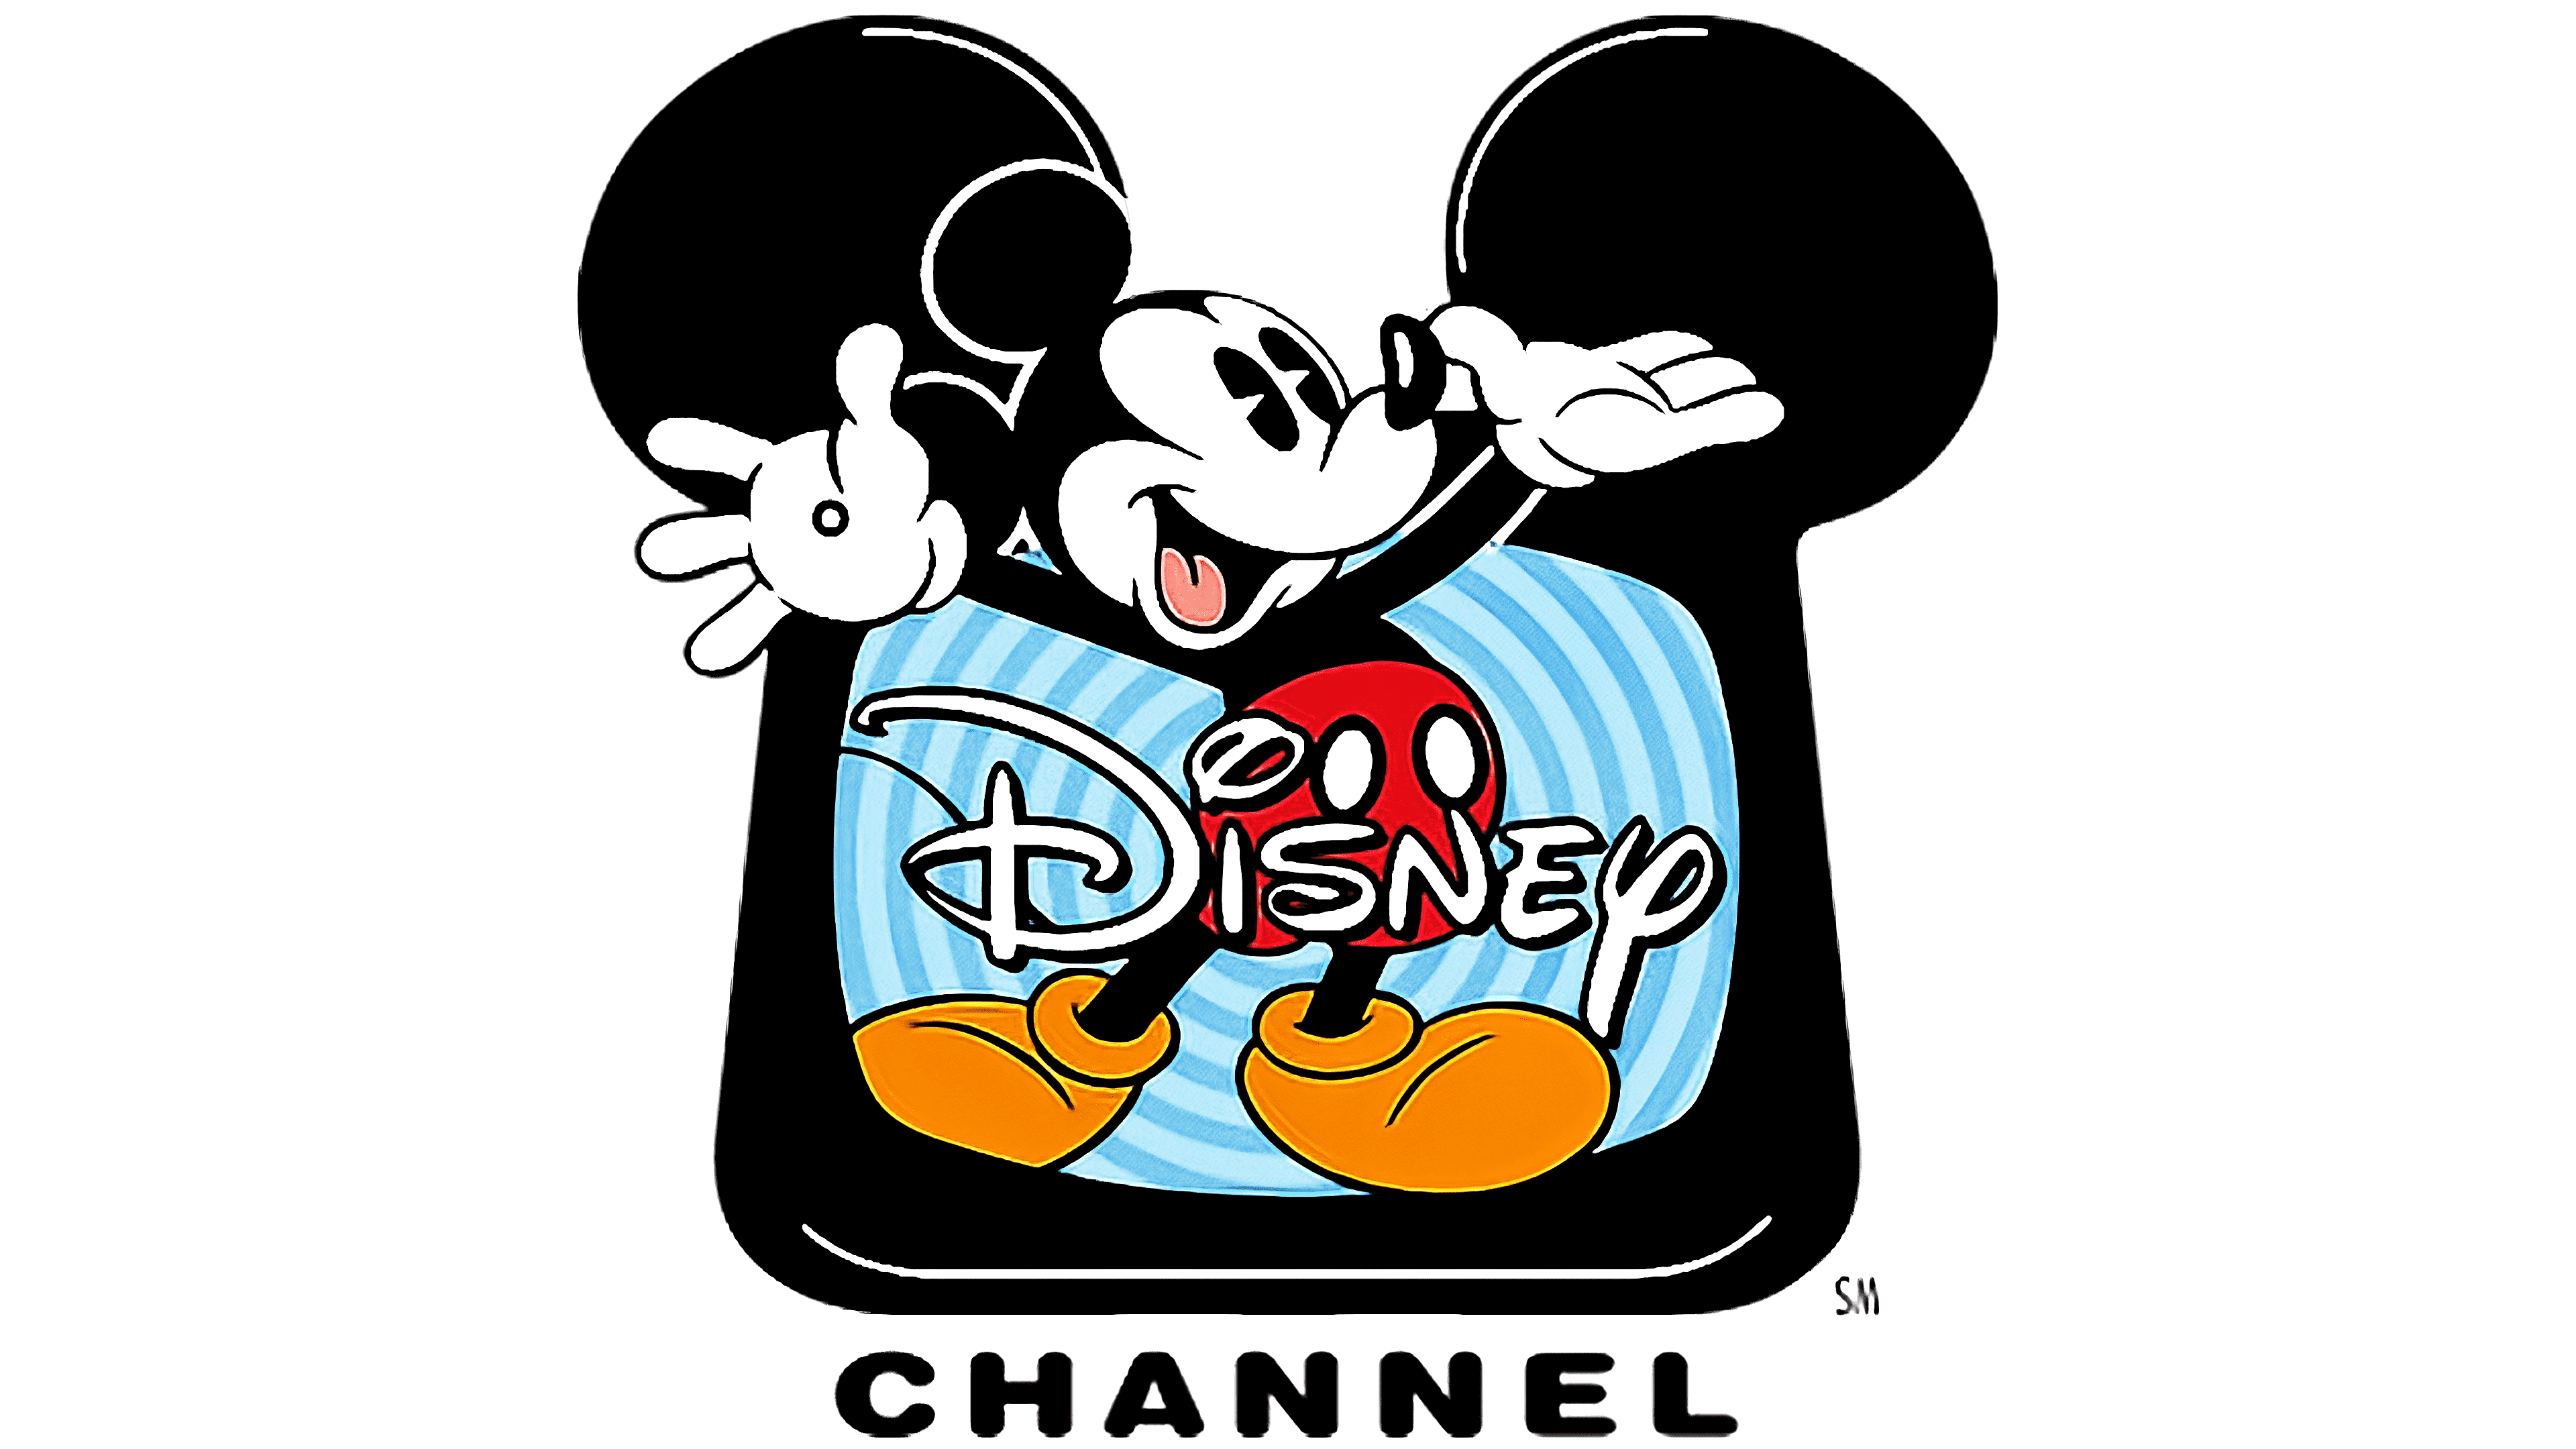 Disney Animation Promos on X Official logo for the 40th anniversary of Disney  Channel April 18 httpstco0ieLI9DxZG  X